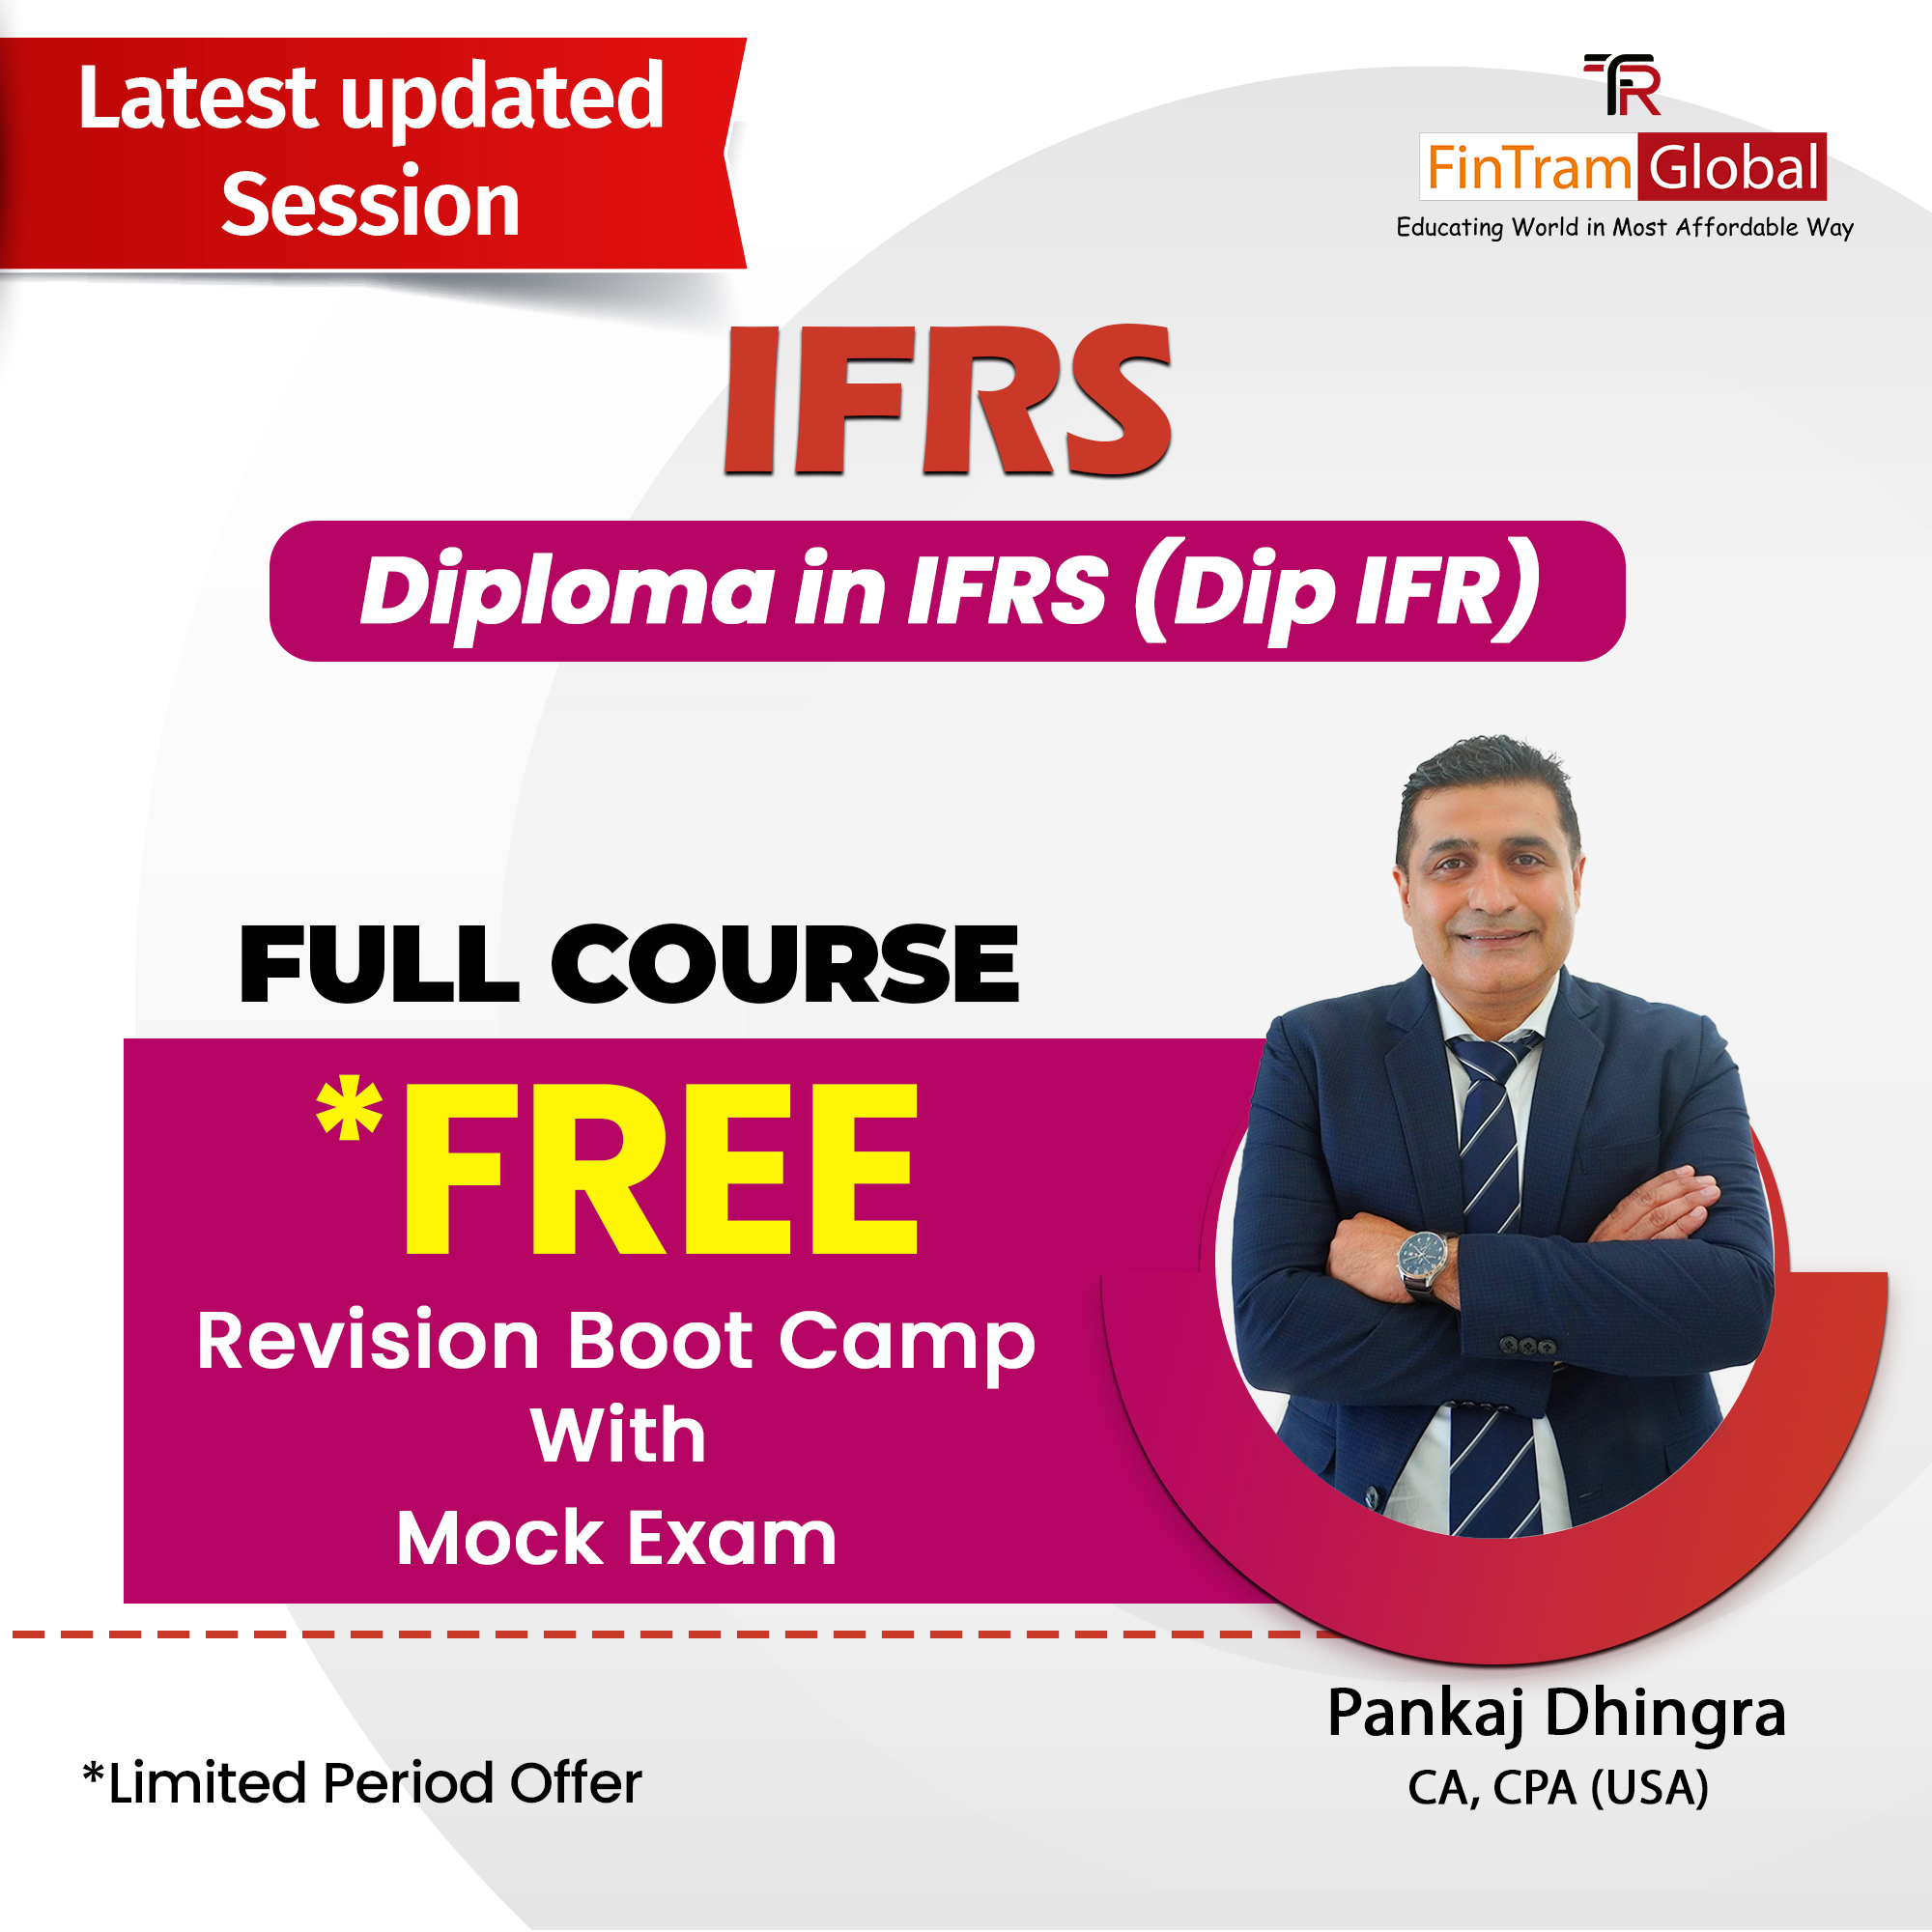 in　ACCA　FinTram　Course　IFRS　Diploma　Global　ACCA　DIPIFR